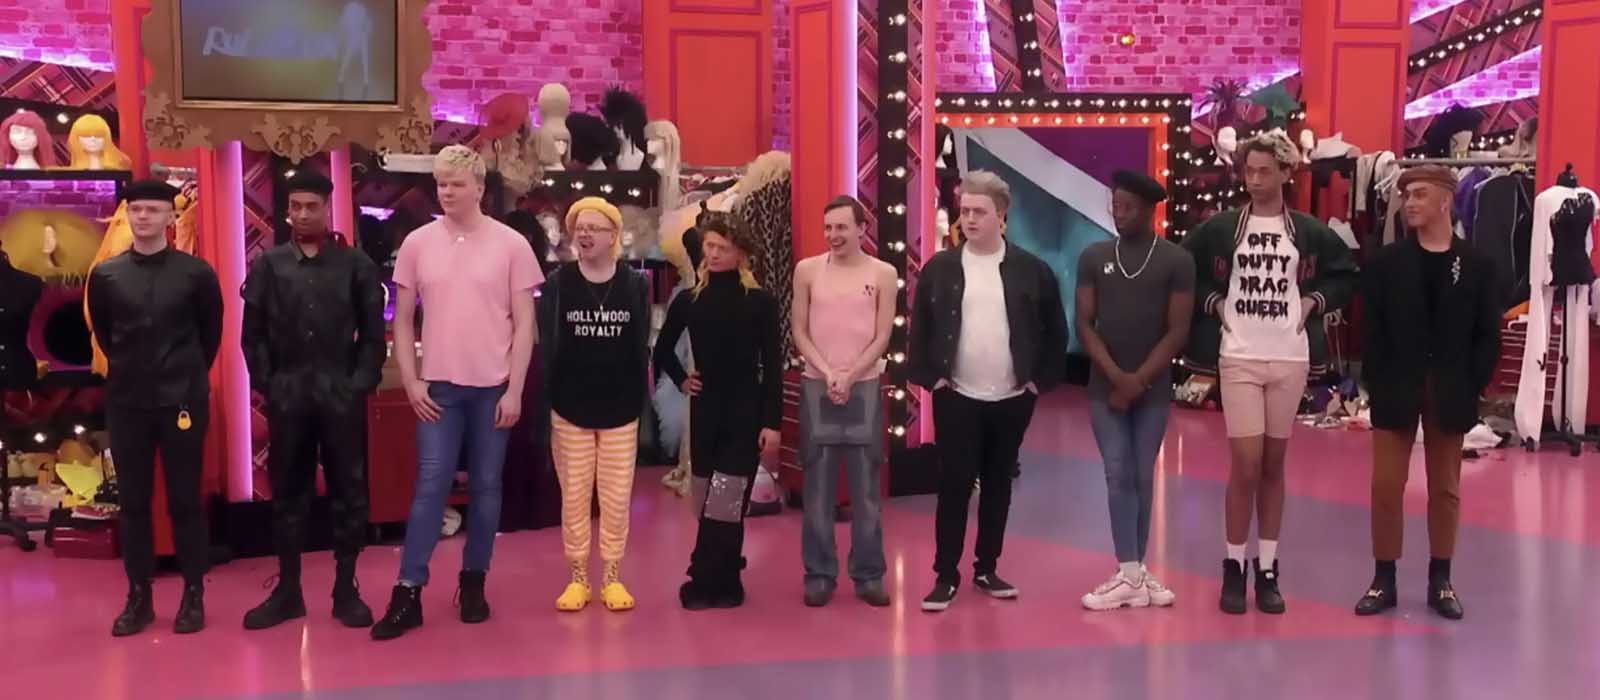 While the other queens of 'Drag Race UK' returned, Veronica Green was sidelined after testing positive from COVID. Hear her spill the tea on the season.